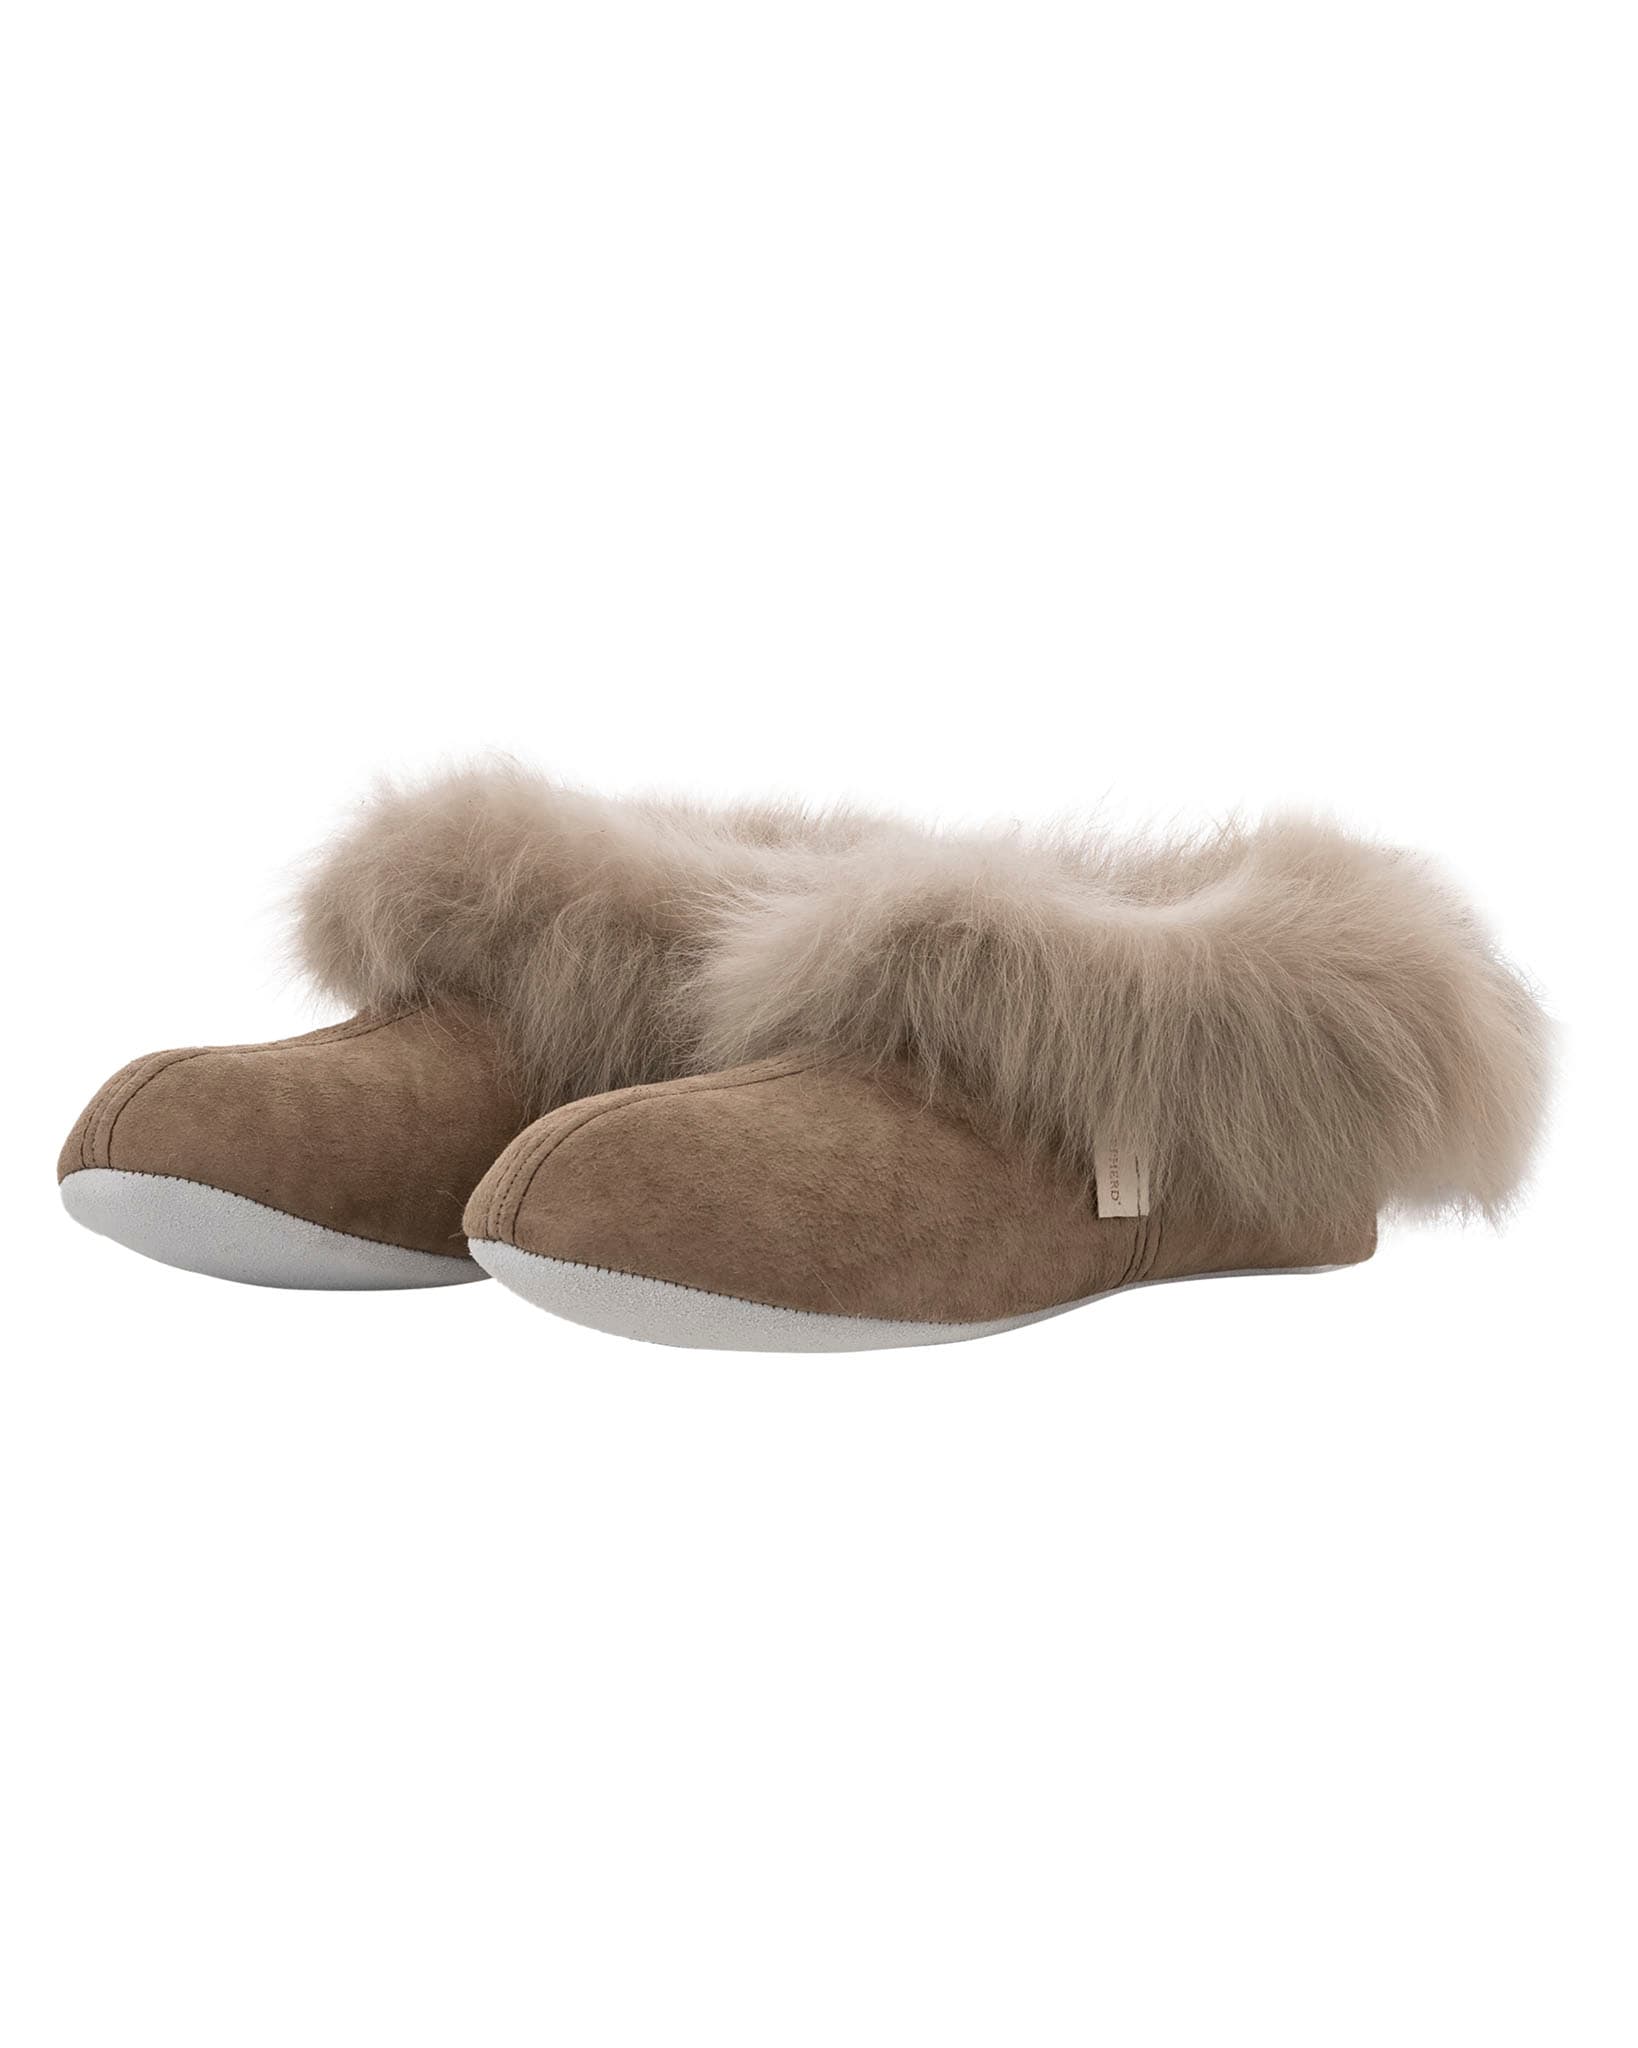 Annelie slippers